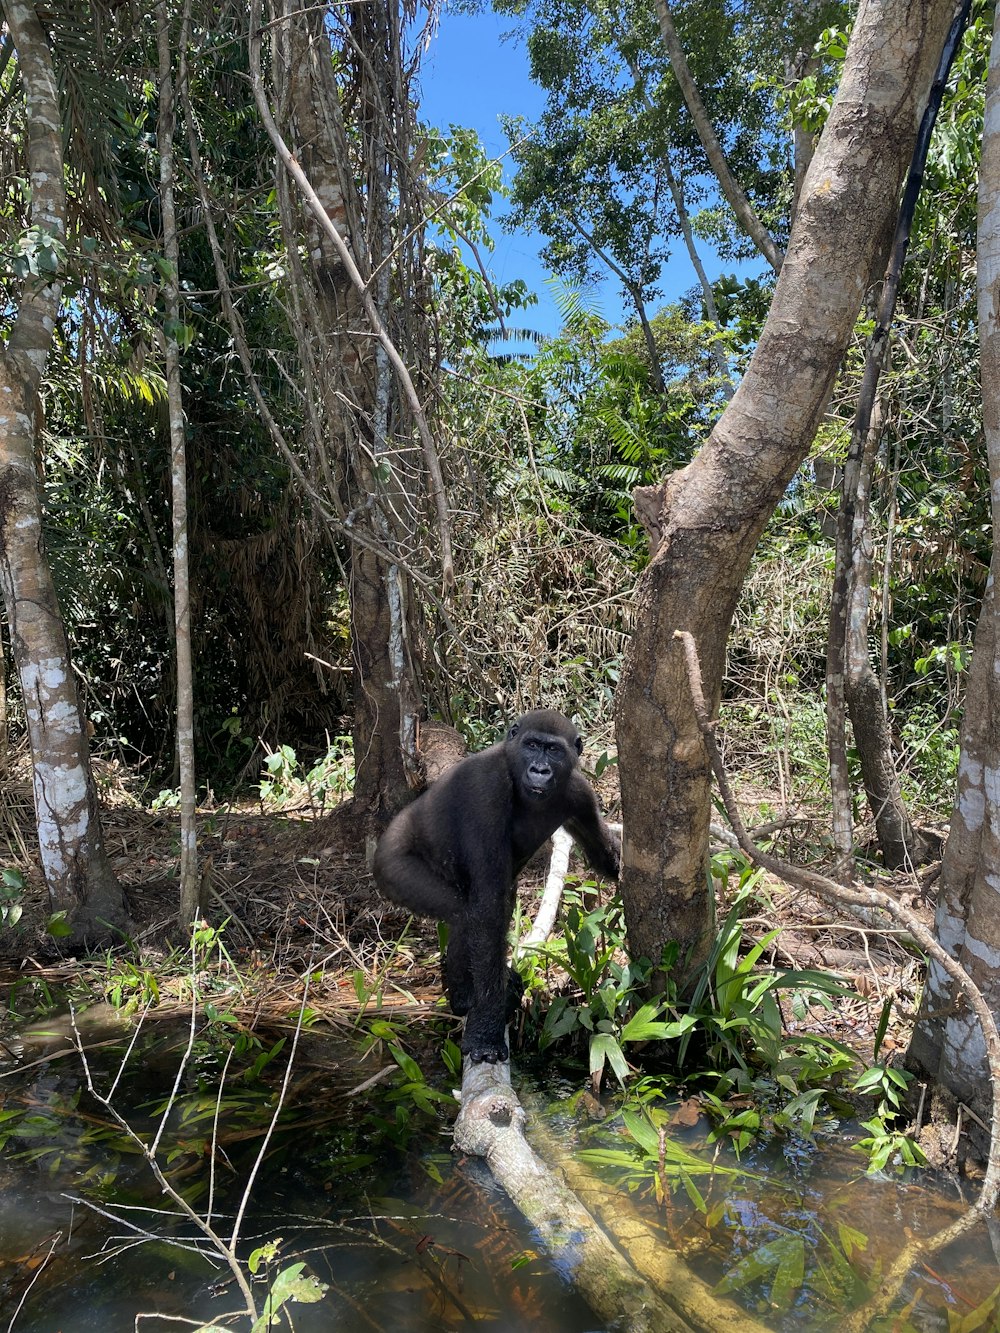 a gorilla standing on a log in the woods